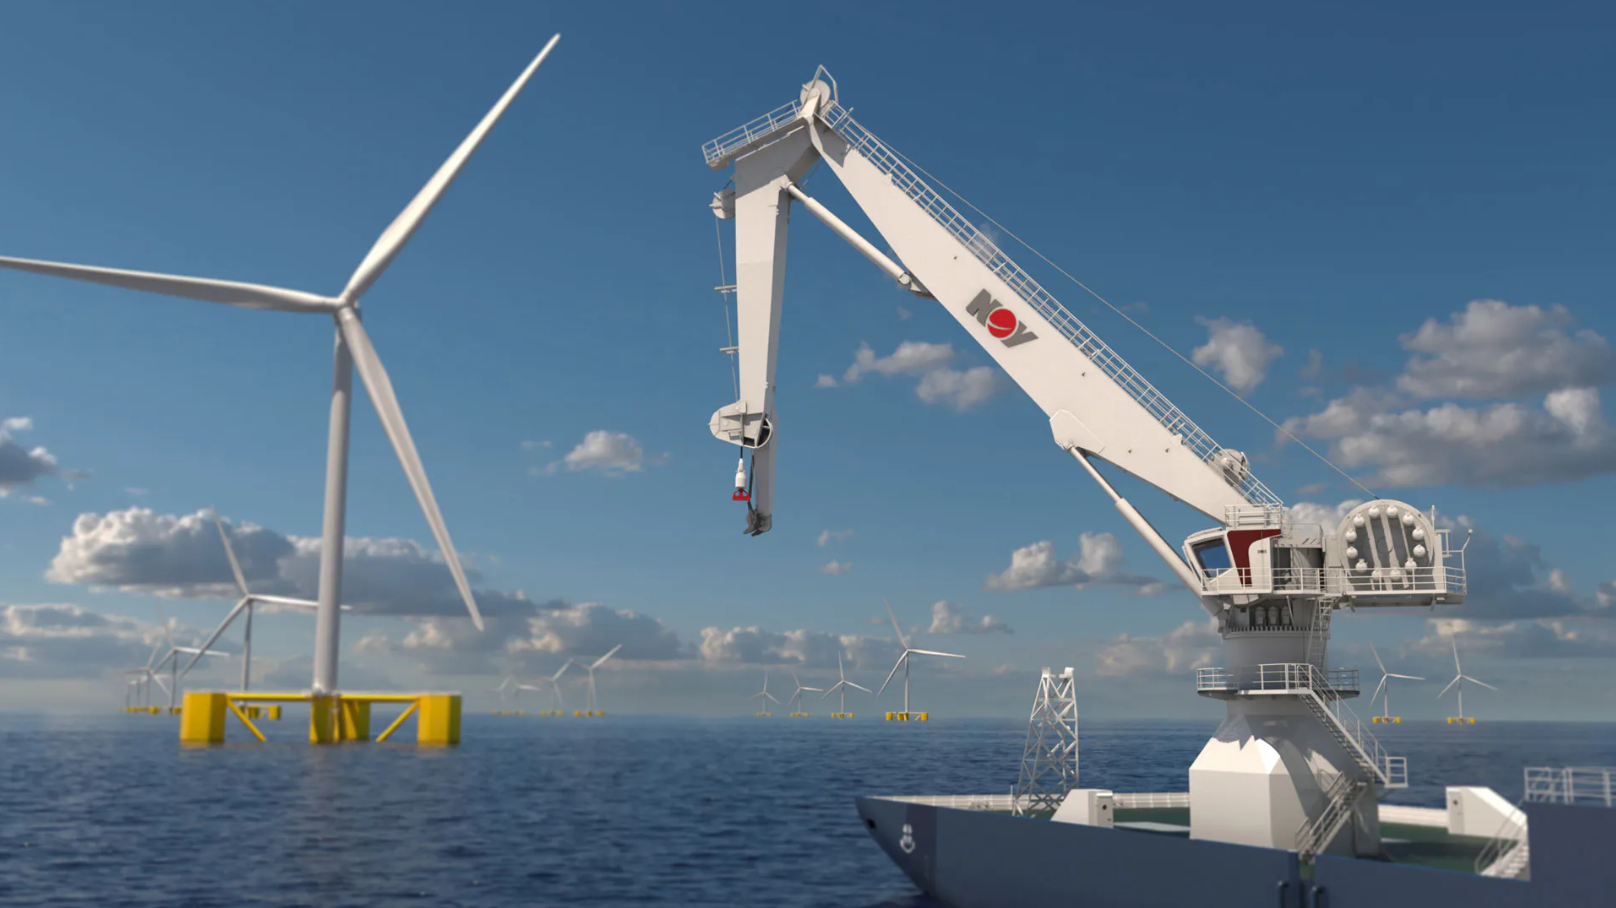 NOV receives order for 'industry’s first electric subsea crane'